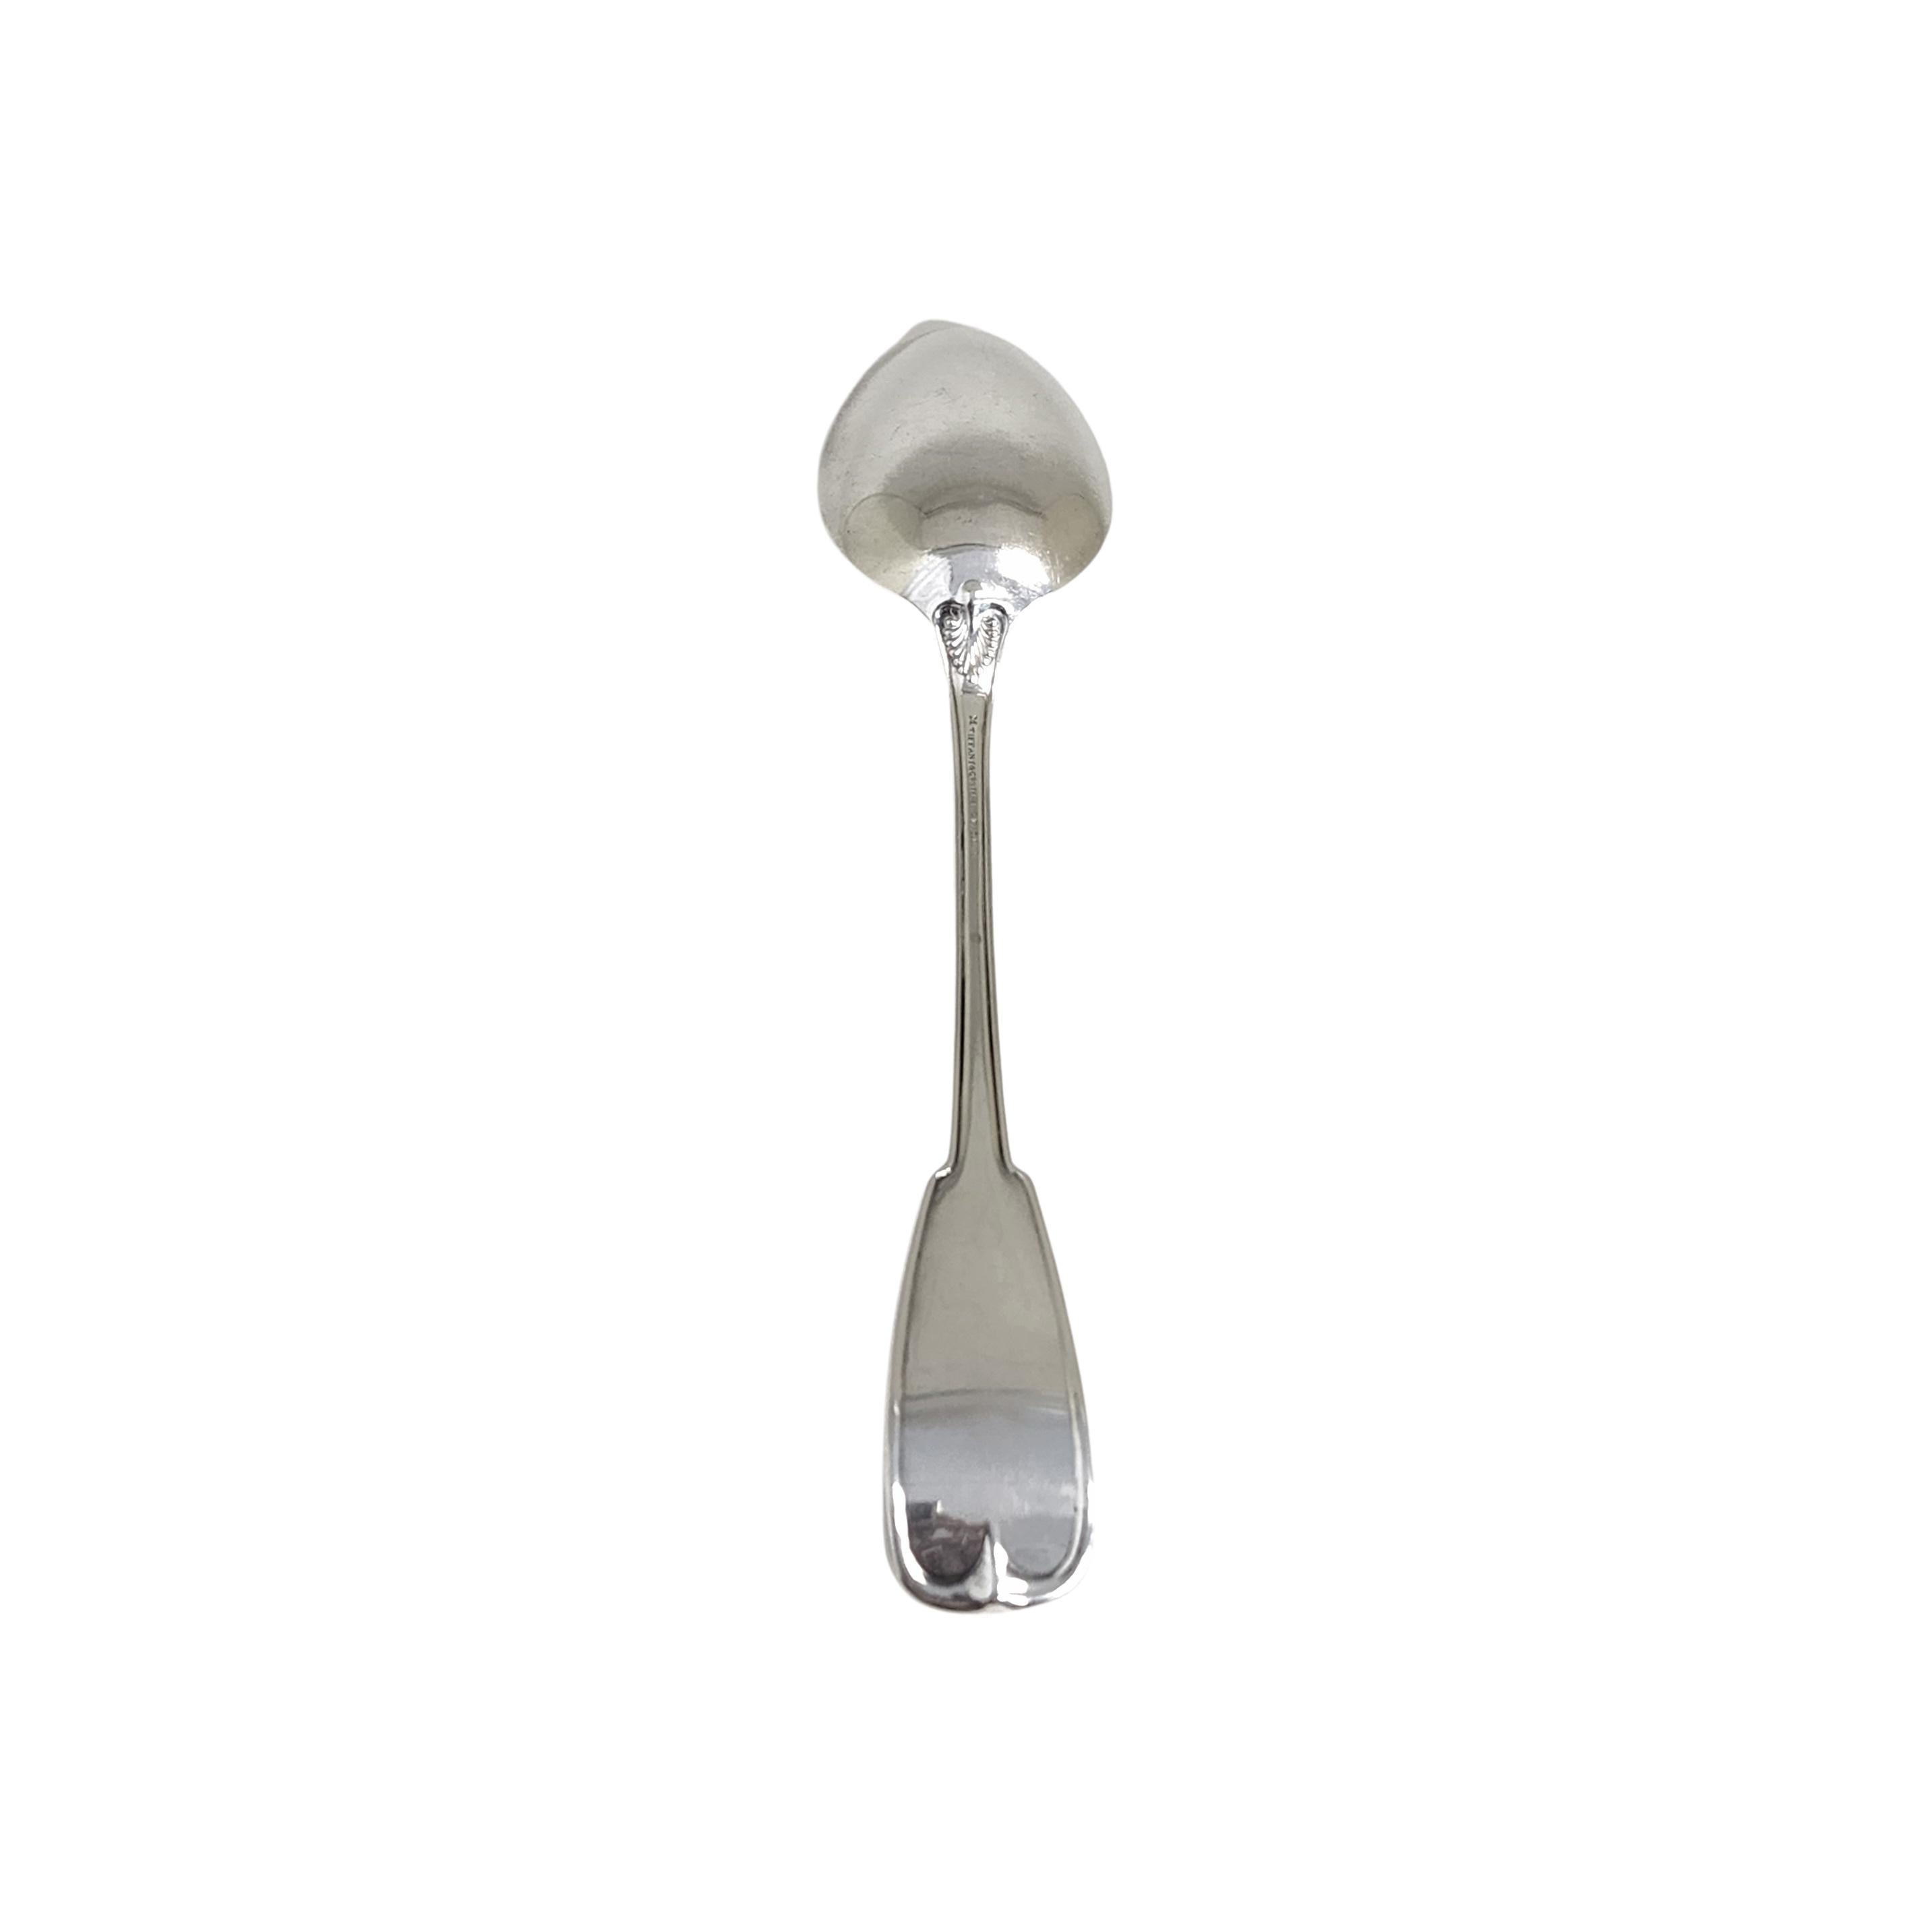 Sterling silver tablespoon/serving spoon by Tiffany & Co in the Palm pattern with monogram.

Monogram appears to be MLS

The Palm pattern is a simple and classic design. Does not include Tiffany & Co box or pouch. The M mark on this spoon dates it